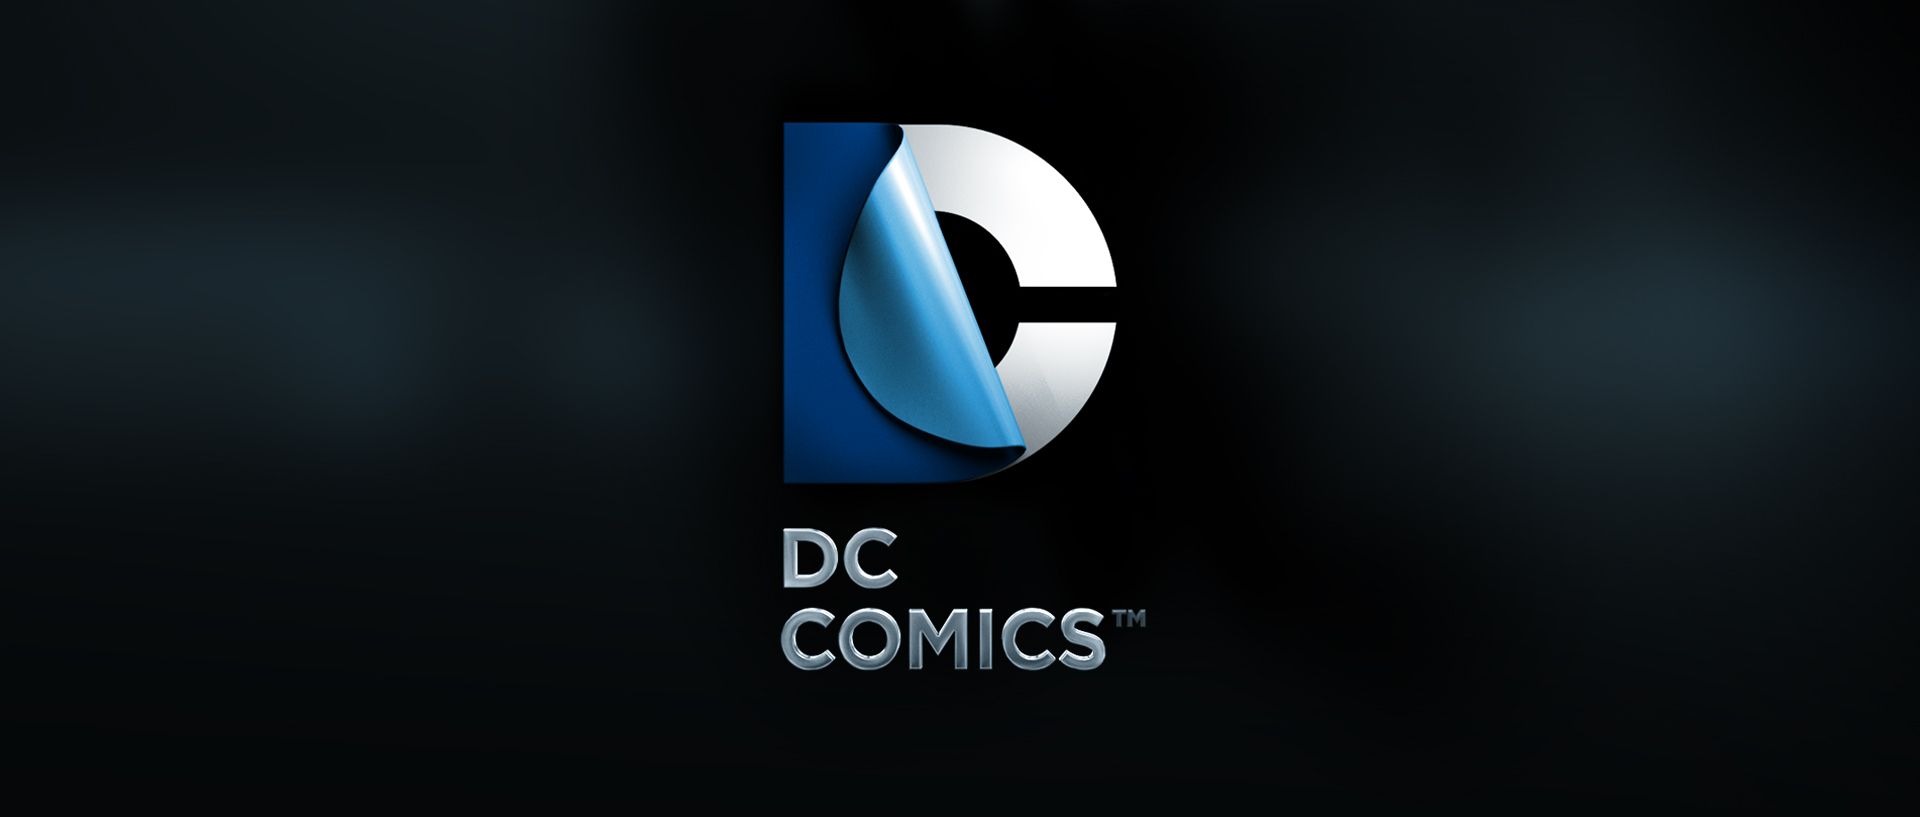 170 DC Comics HD Wallpapers | Backgrounds - Wallpaper Abyss